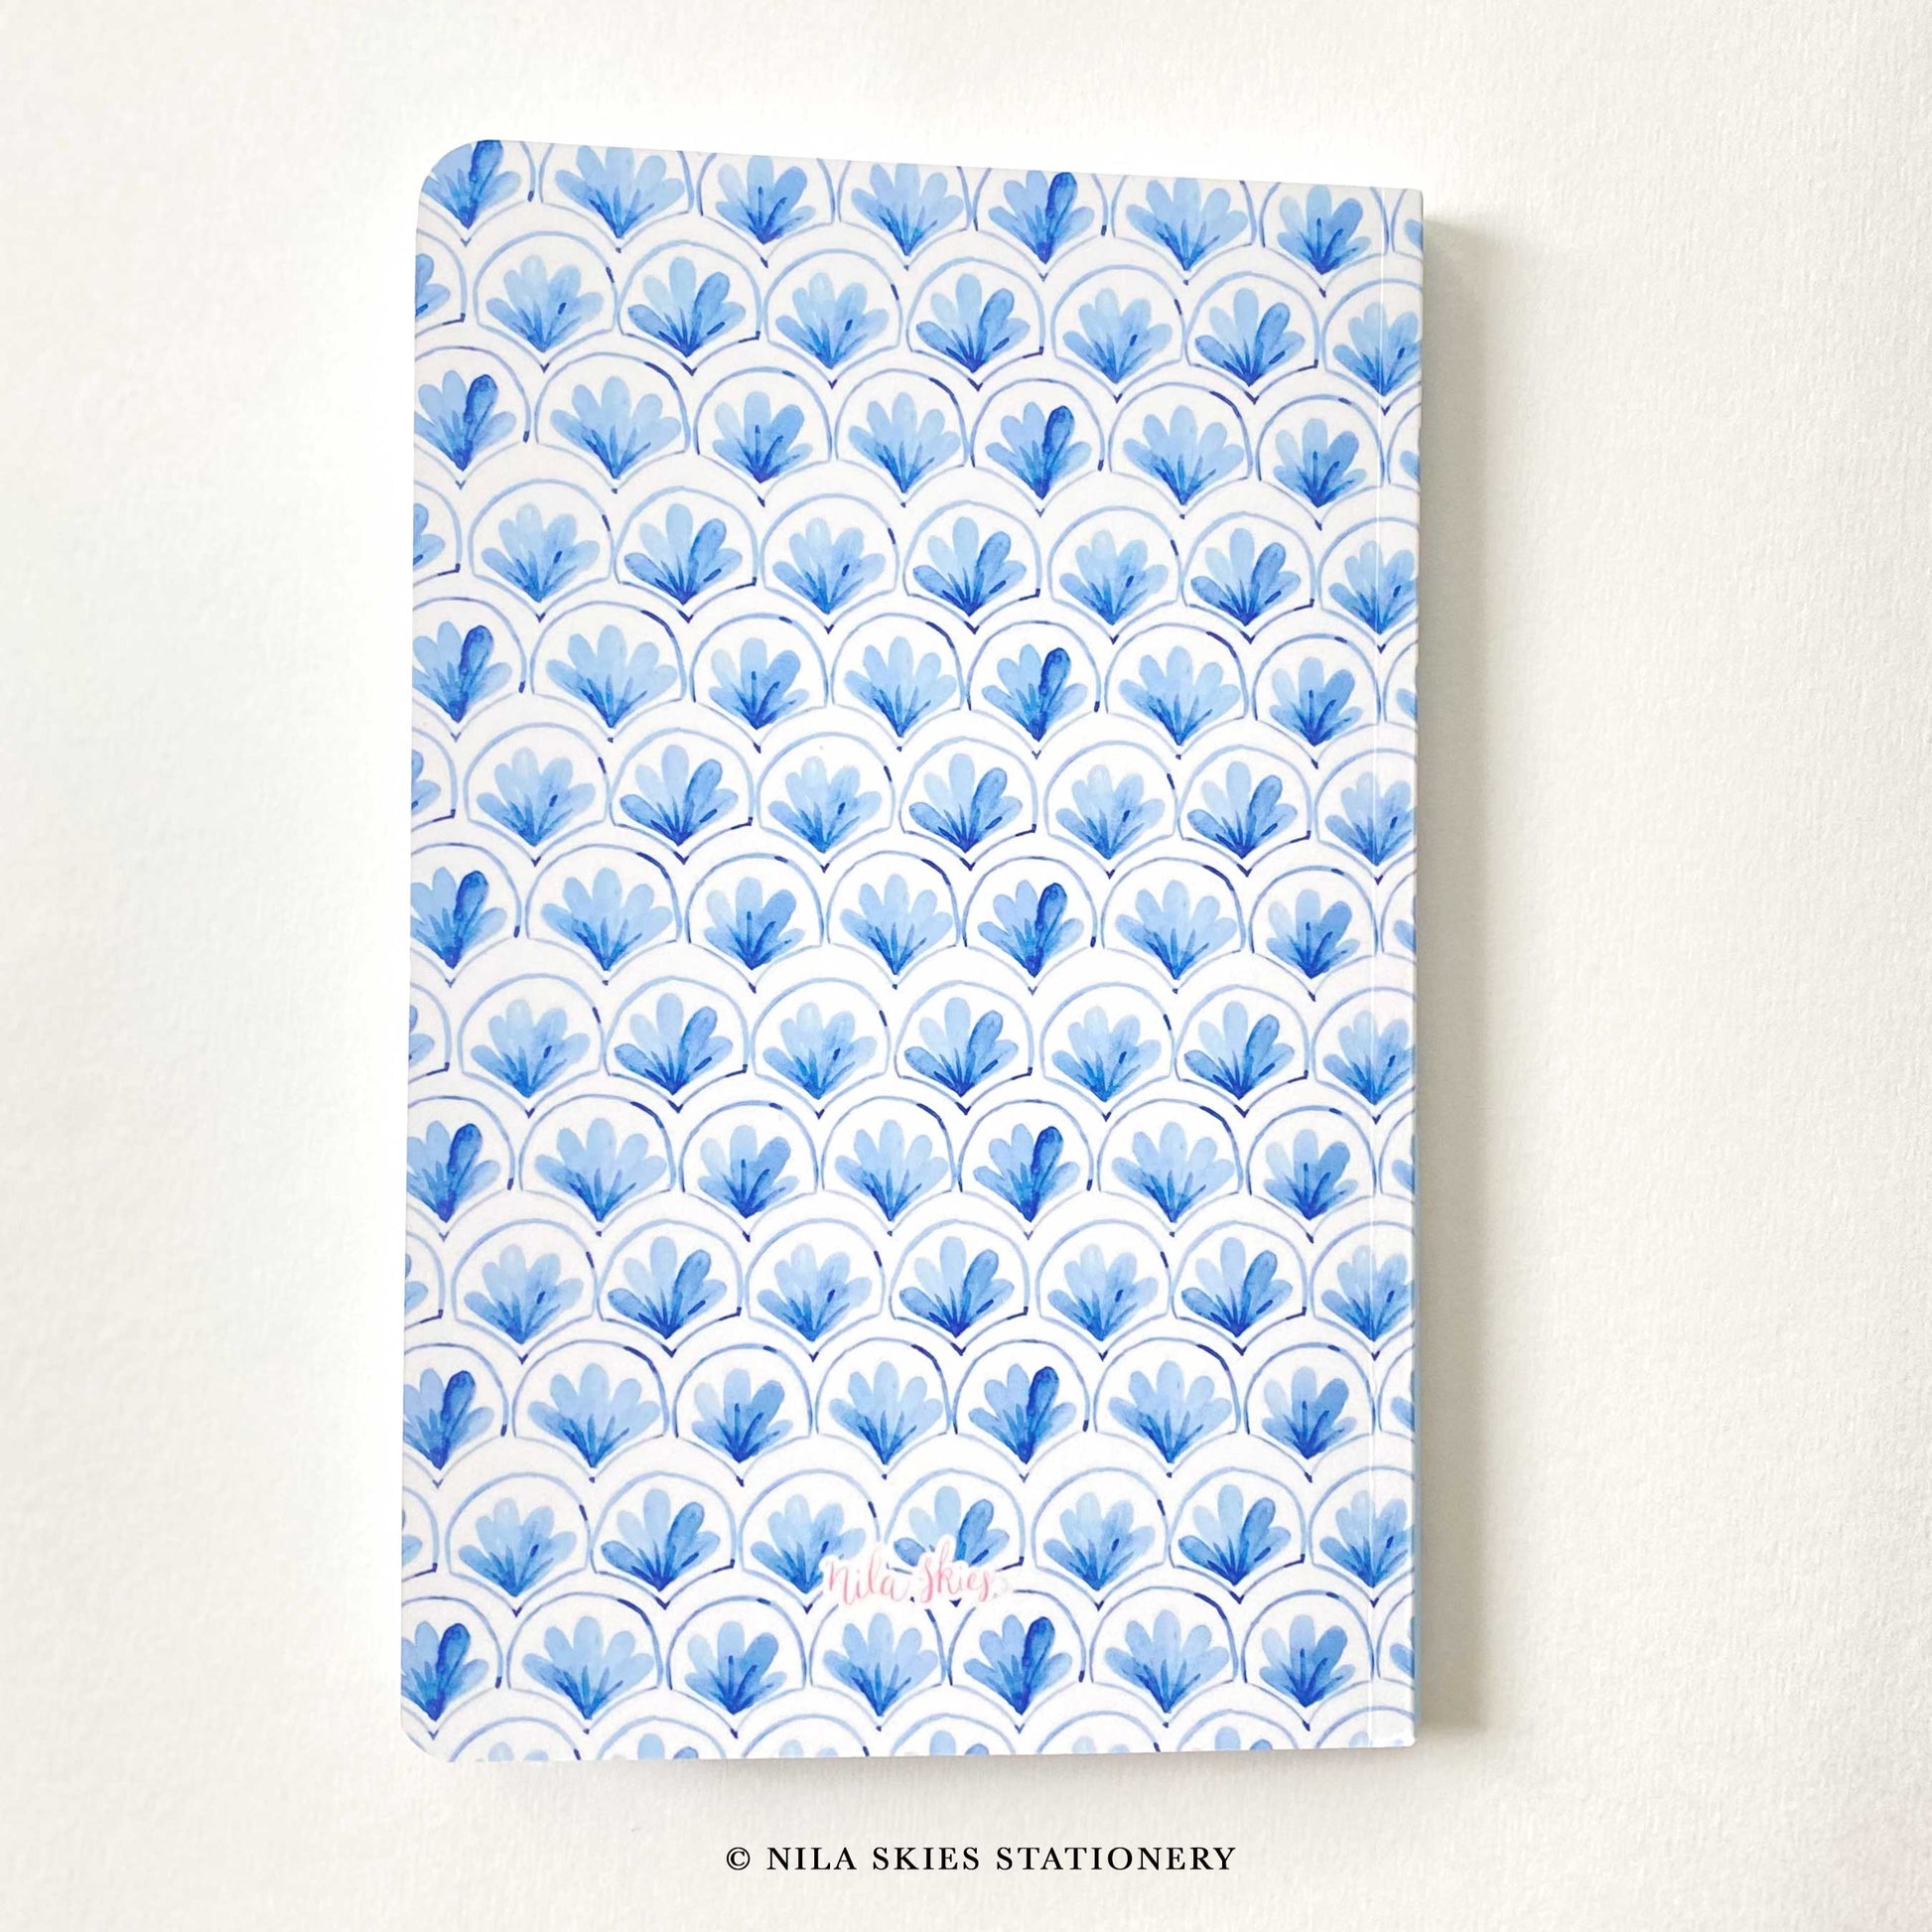 Blue Watercolor Notebook - Simply Notebooks